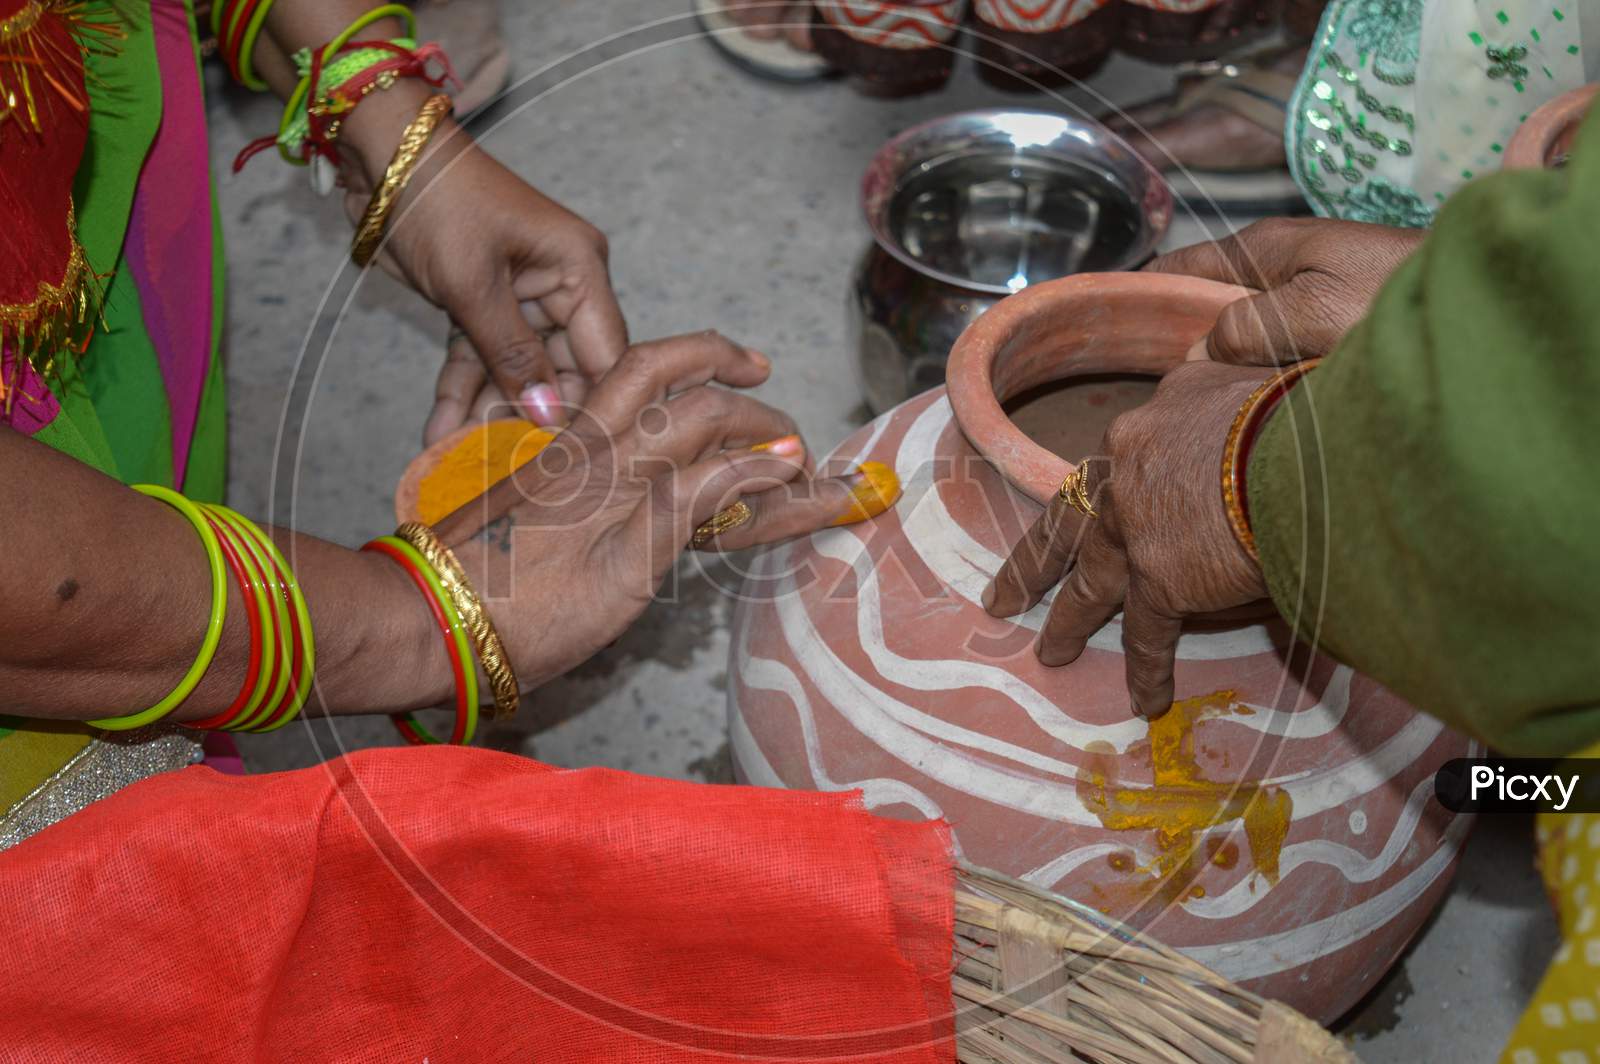 Lady Putting Turmeric On Clay Pot In Indian Weddings.